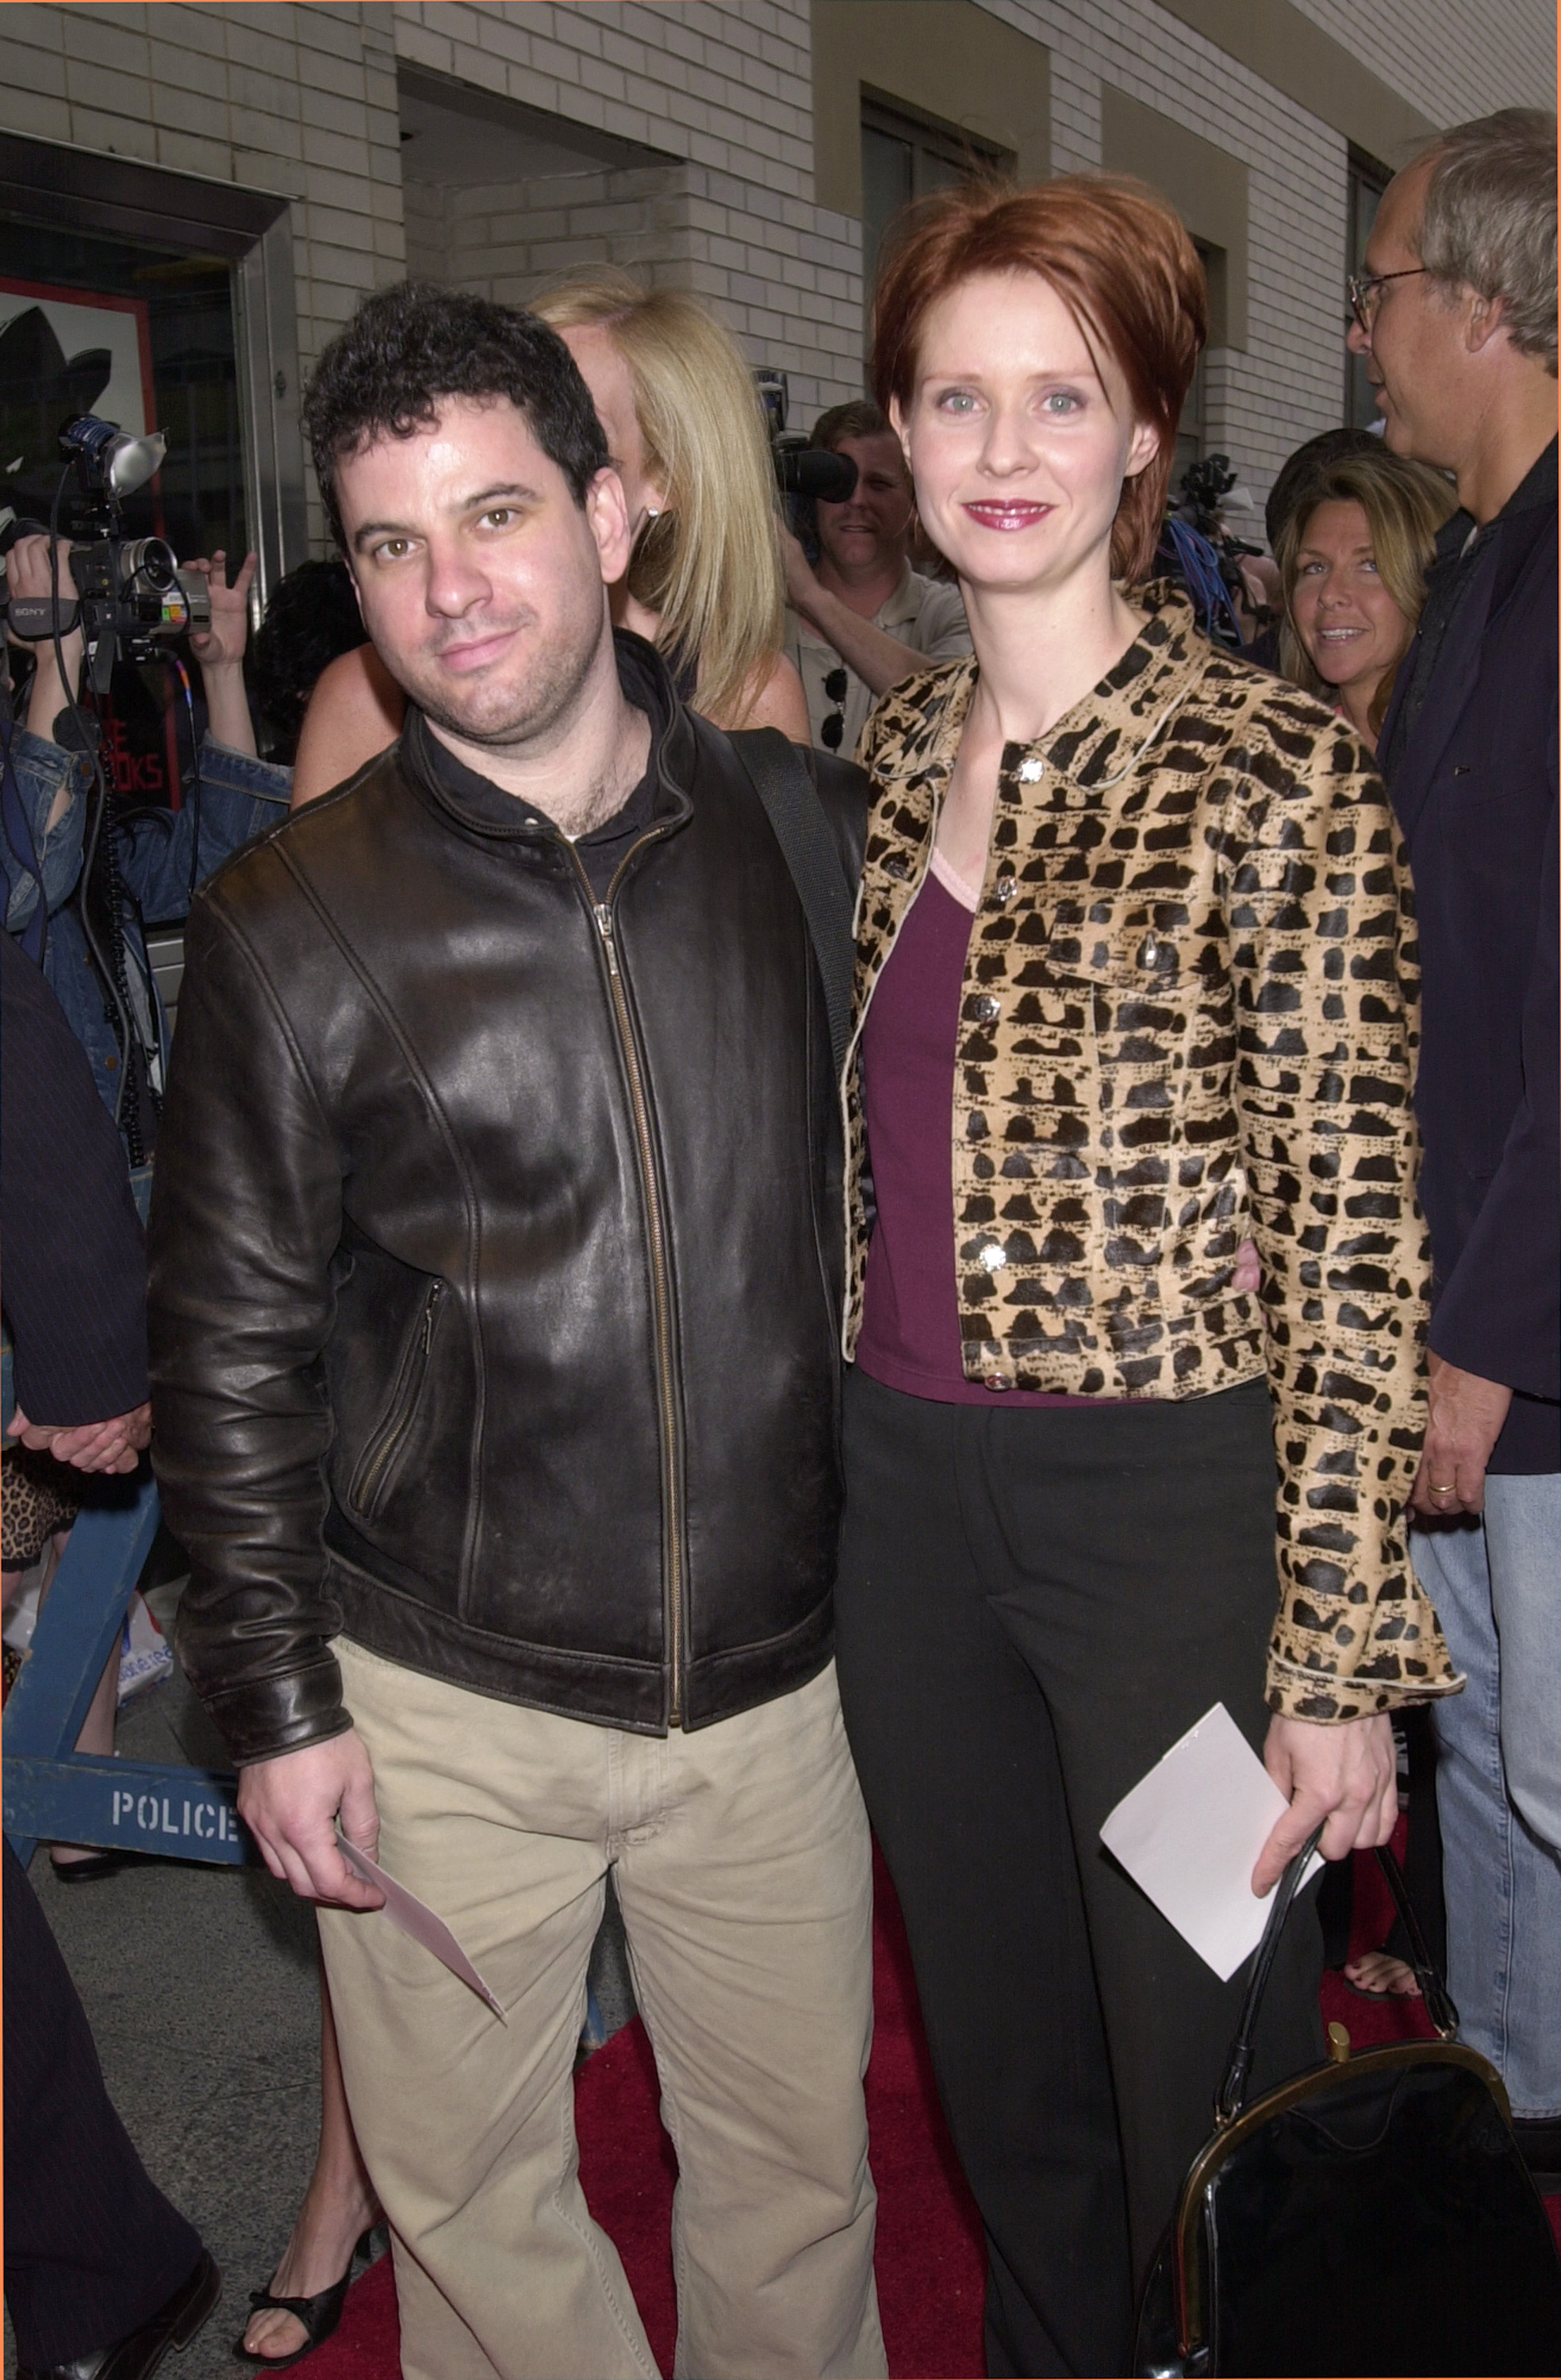 Danny Mozes and Cynthia Nixon attend the "Small Time Crooks" premiere in 2000 in New York City. | Source: Getty Images